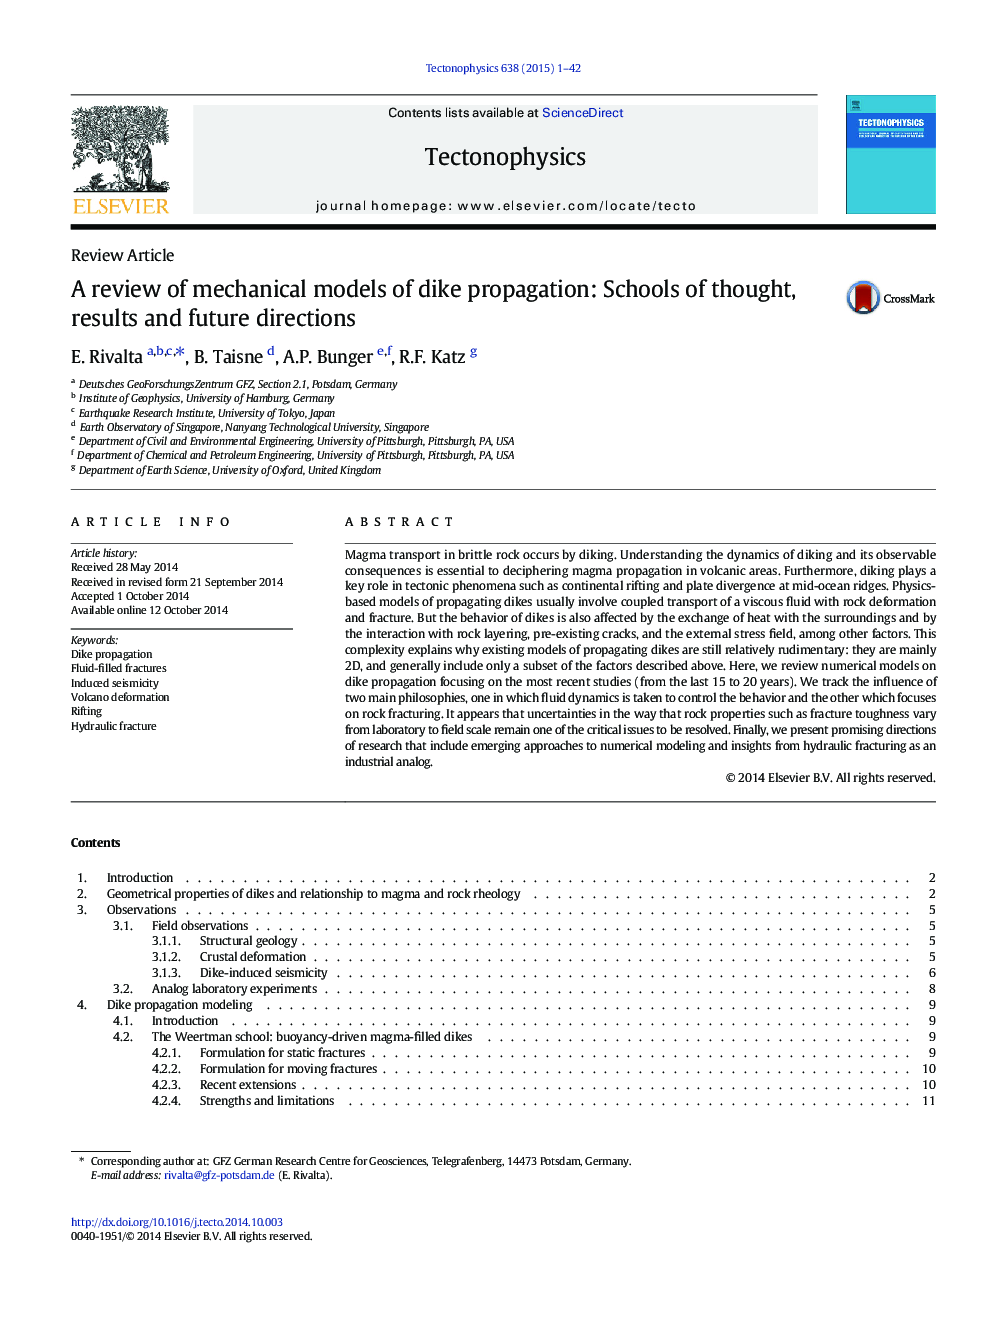 Review ArticleA review of mechanical models of dike propagation: Schools of thought, results and future directions